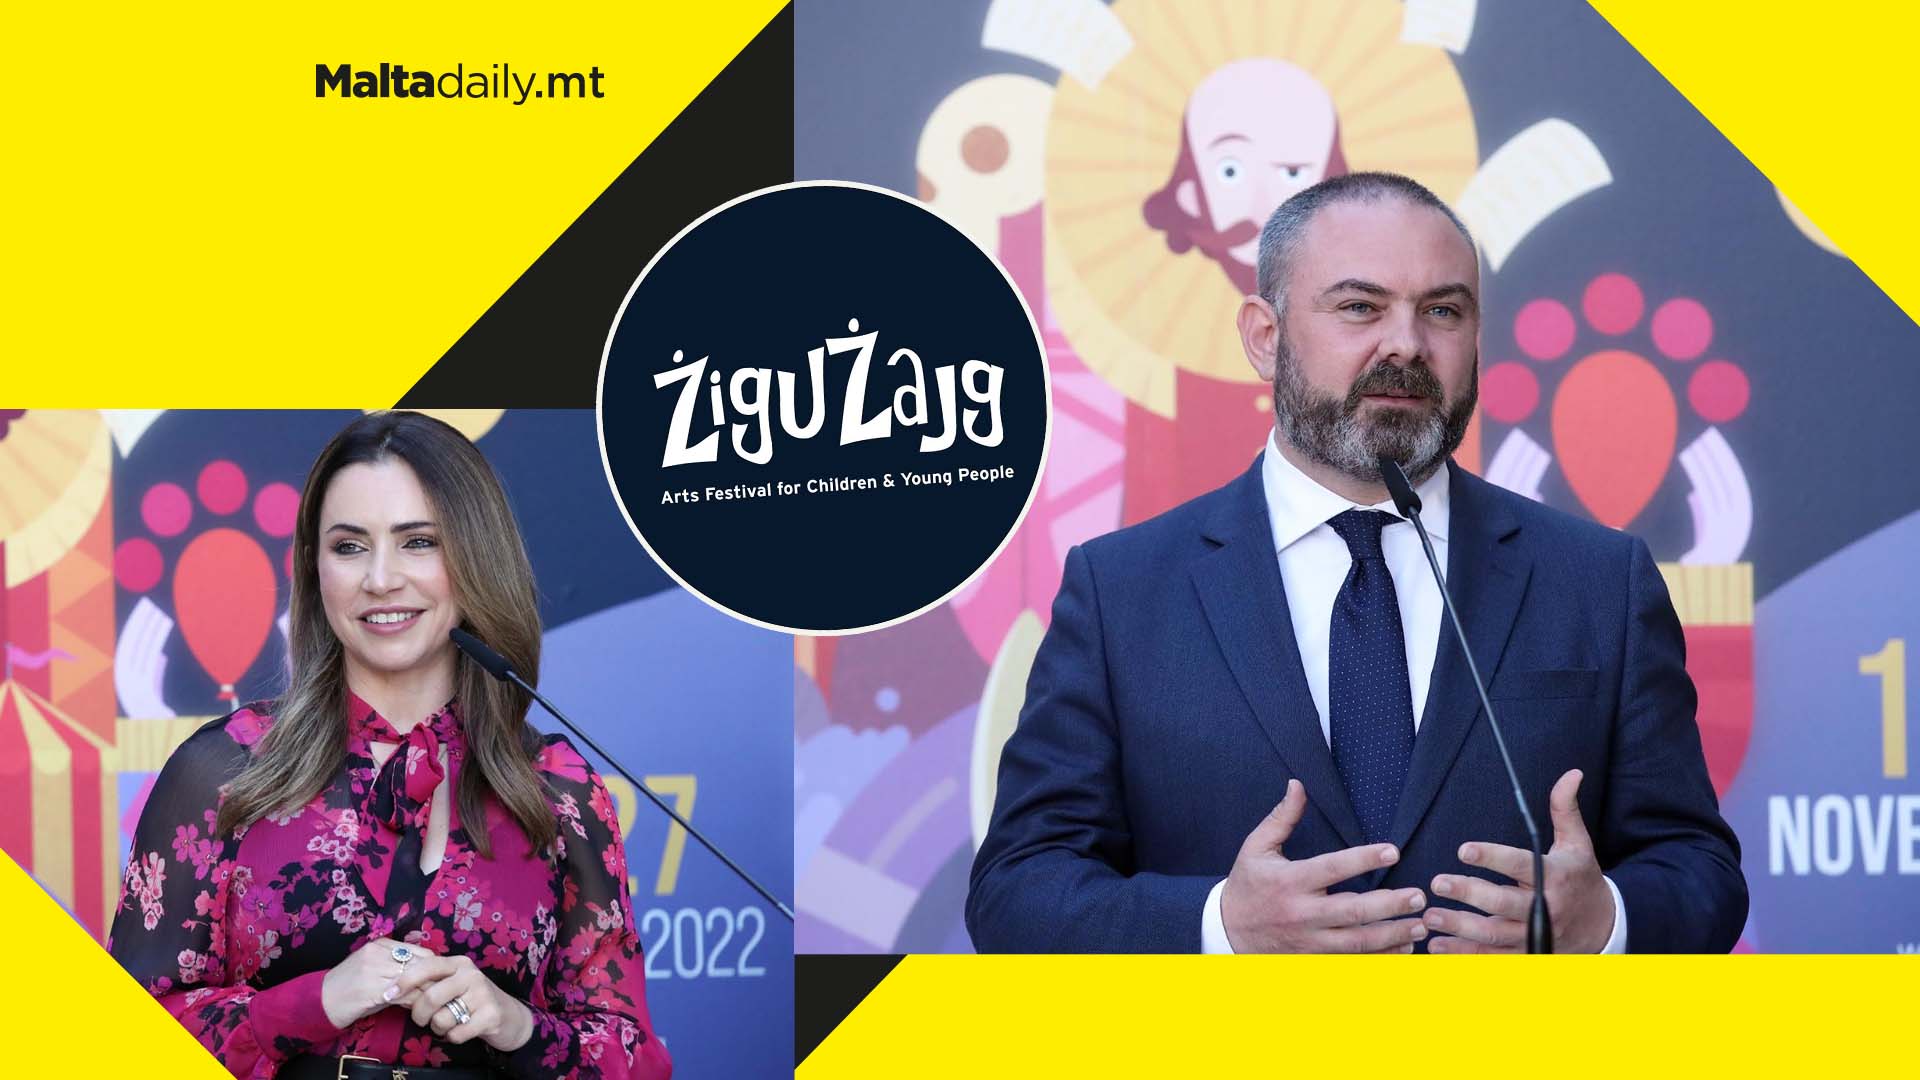 ŻiguŻajg Arts Festival for Children and Young People 2022 officially open